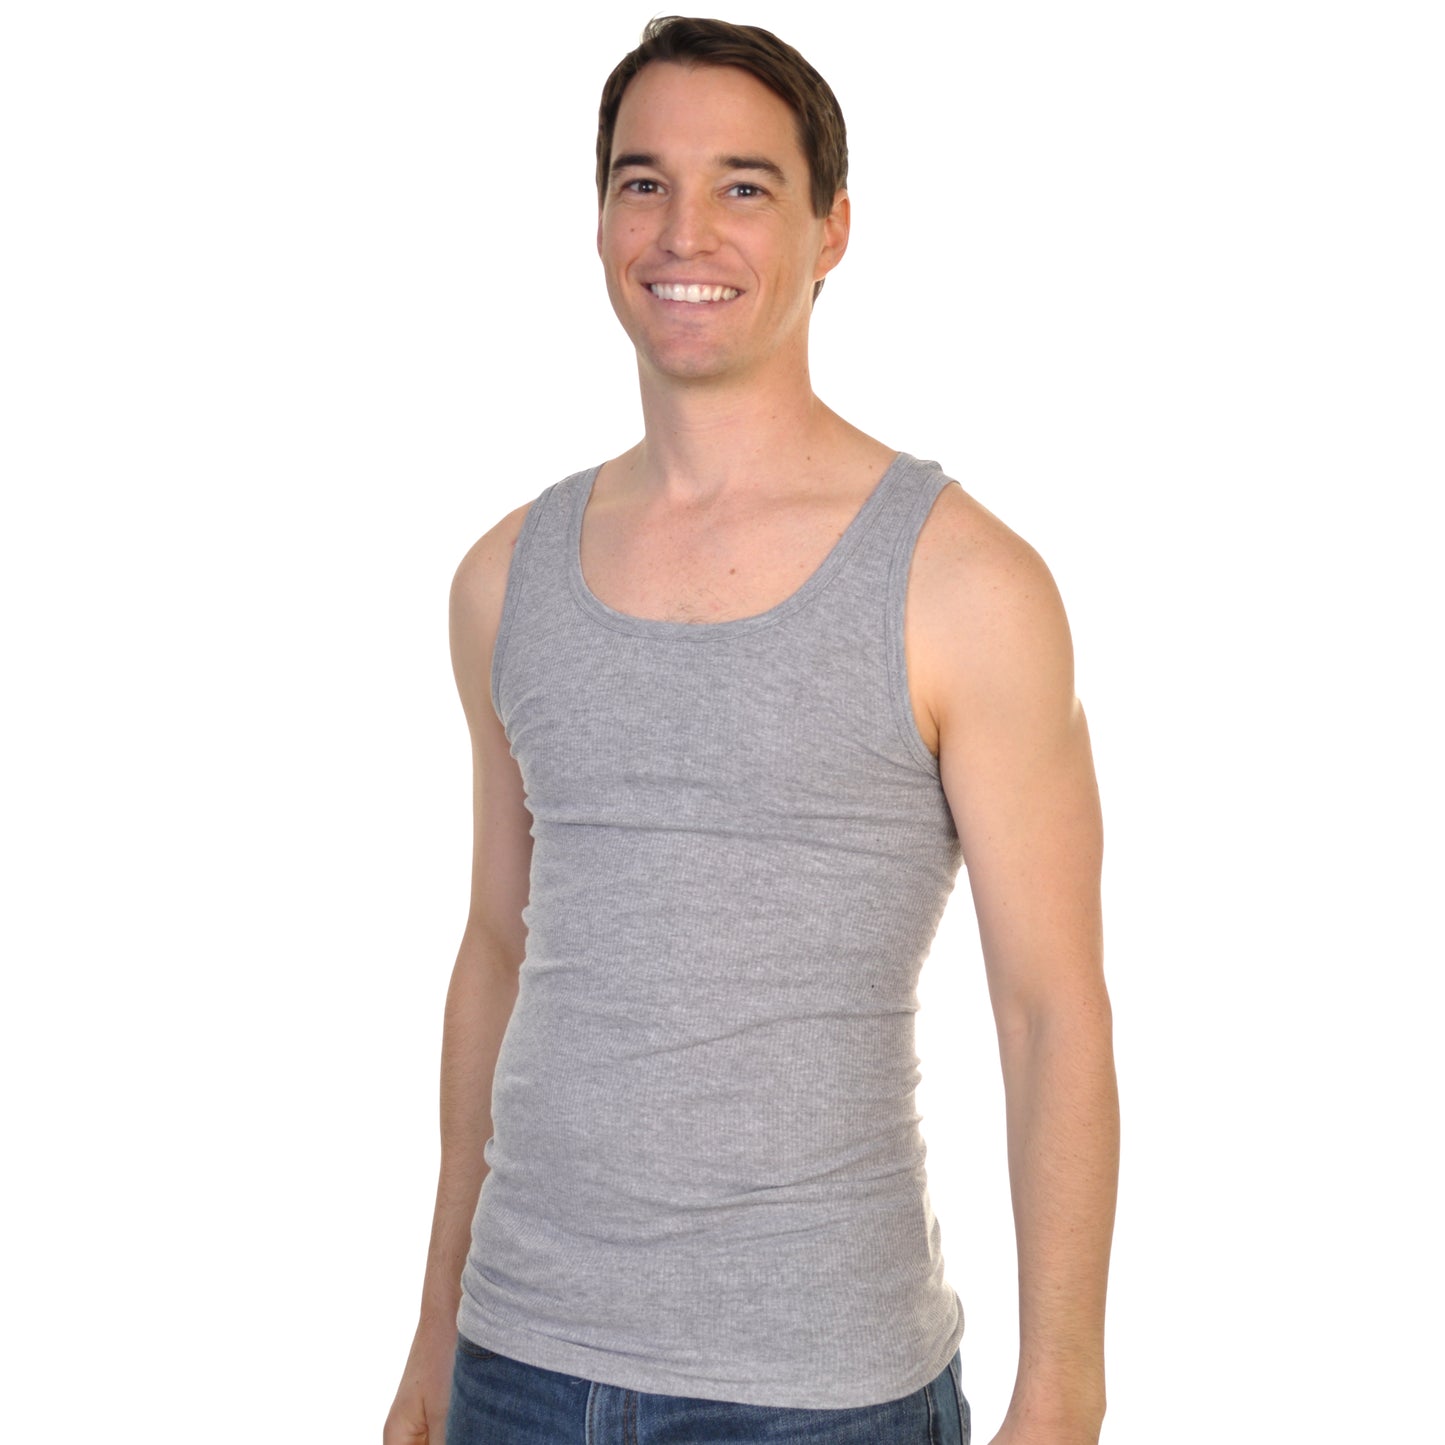 Swan Color Ribbed Slim Fit Basic A-Shirts Tank Top (12-Pack), #6401